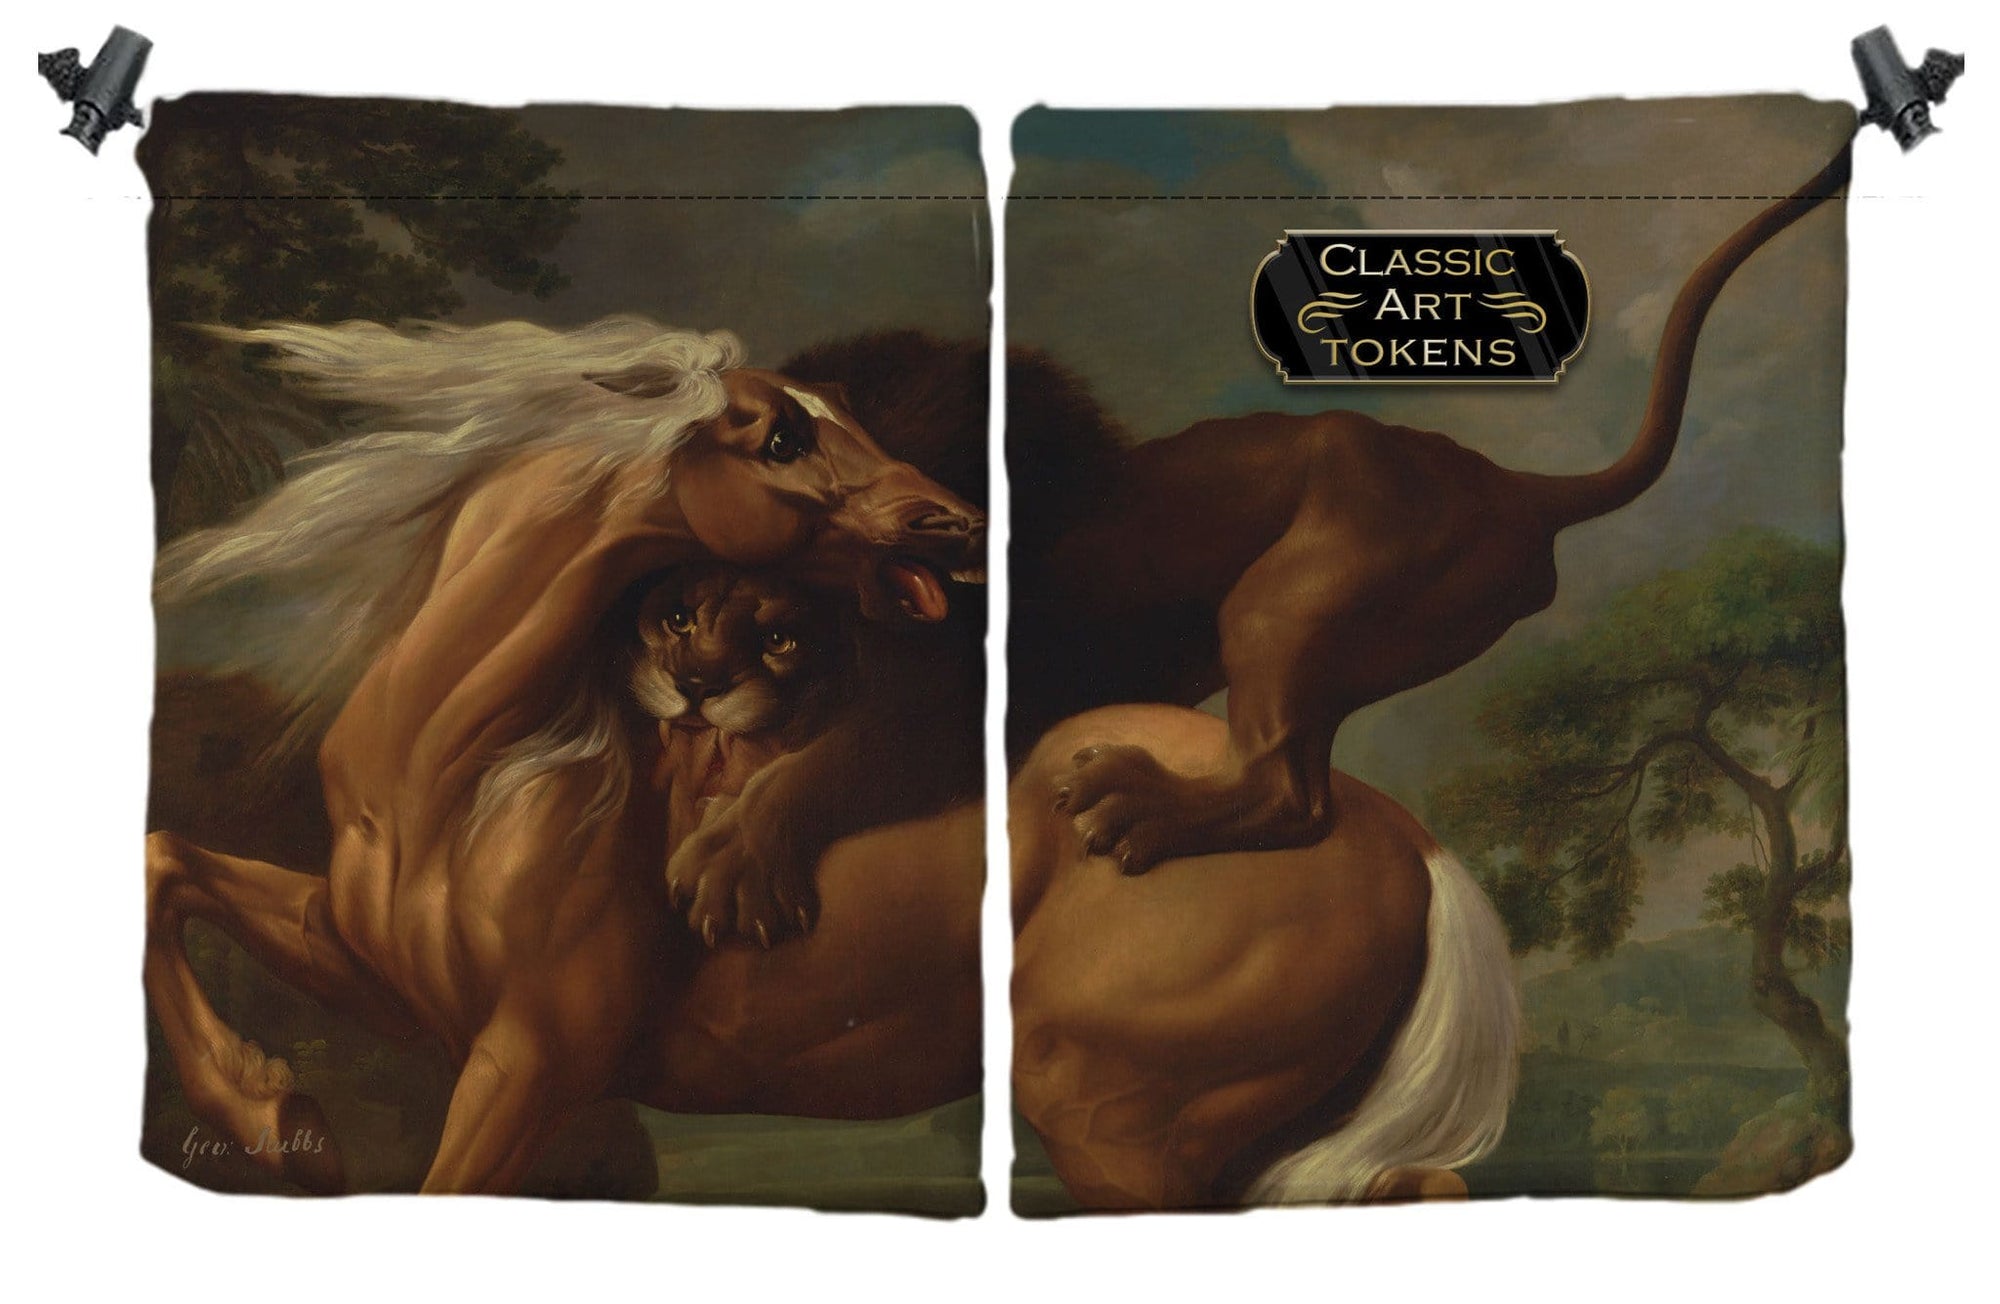 Carnivore Dice Bag by George Stubbs - Dice Bag - Original Magic Art - Accessories for Magic the Gathering and other card games